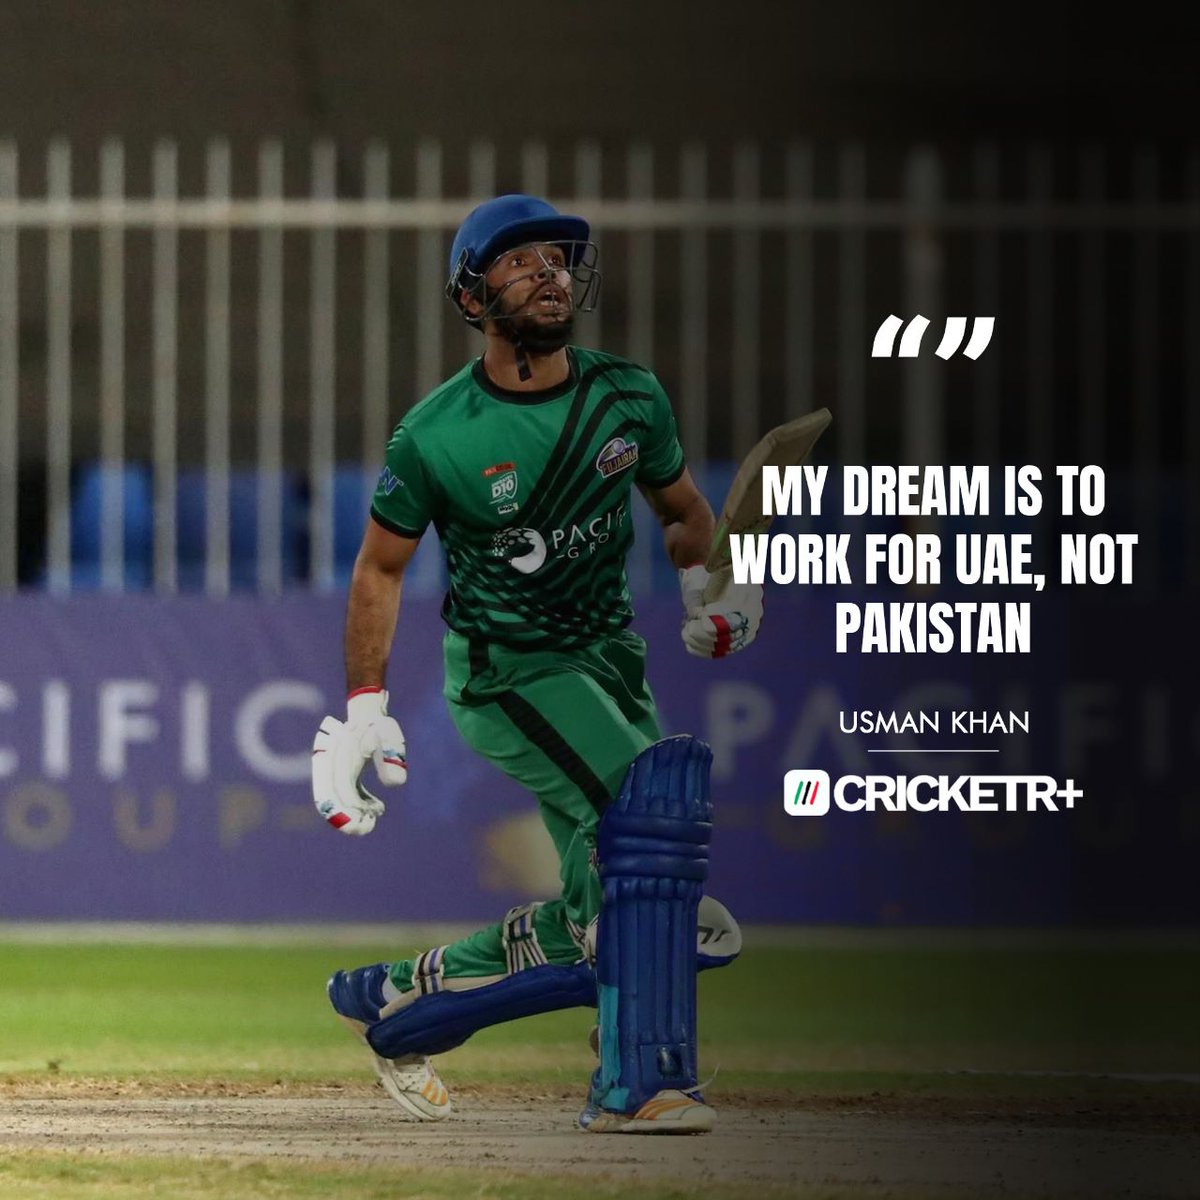 🗣️ 'One day I want to play against Pakistan to show them my talent. I am waiting for my time' said Usman Khan

Your thoughts on the statement? 💭

#CricketR #UsmanKhan